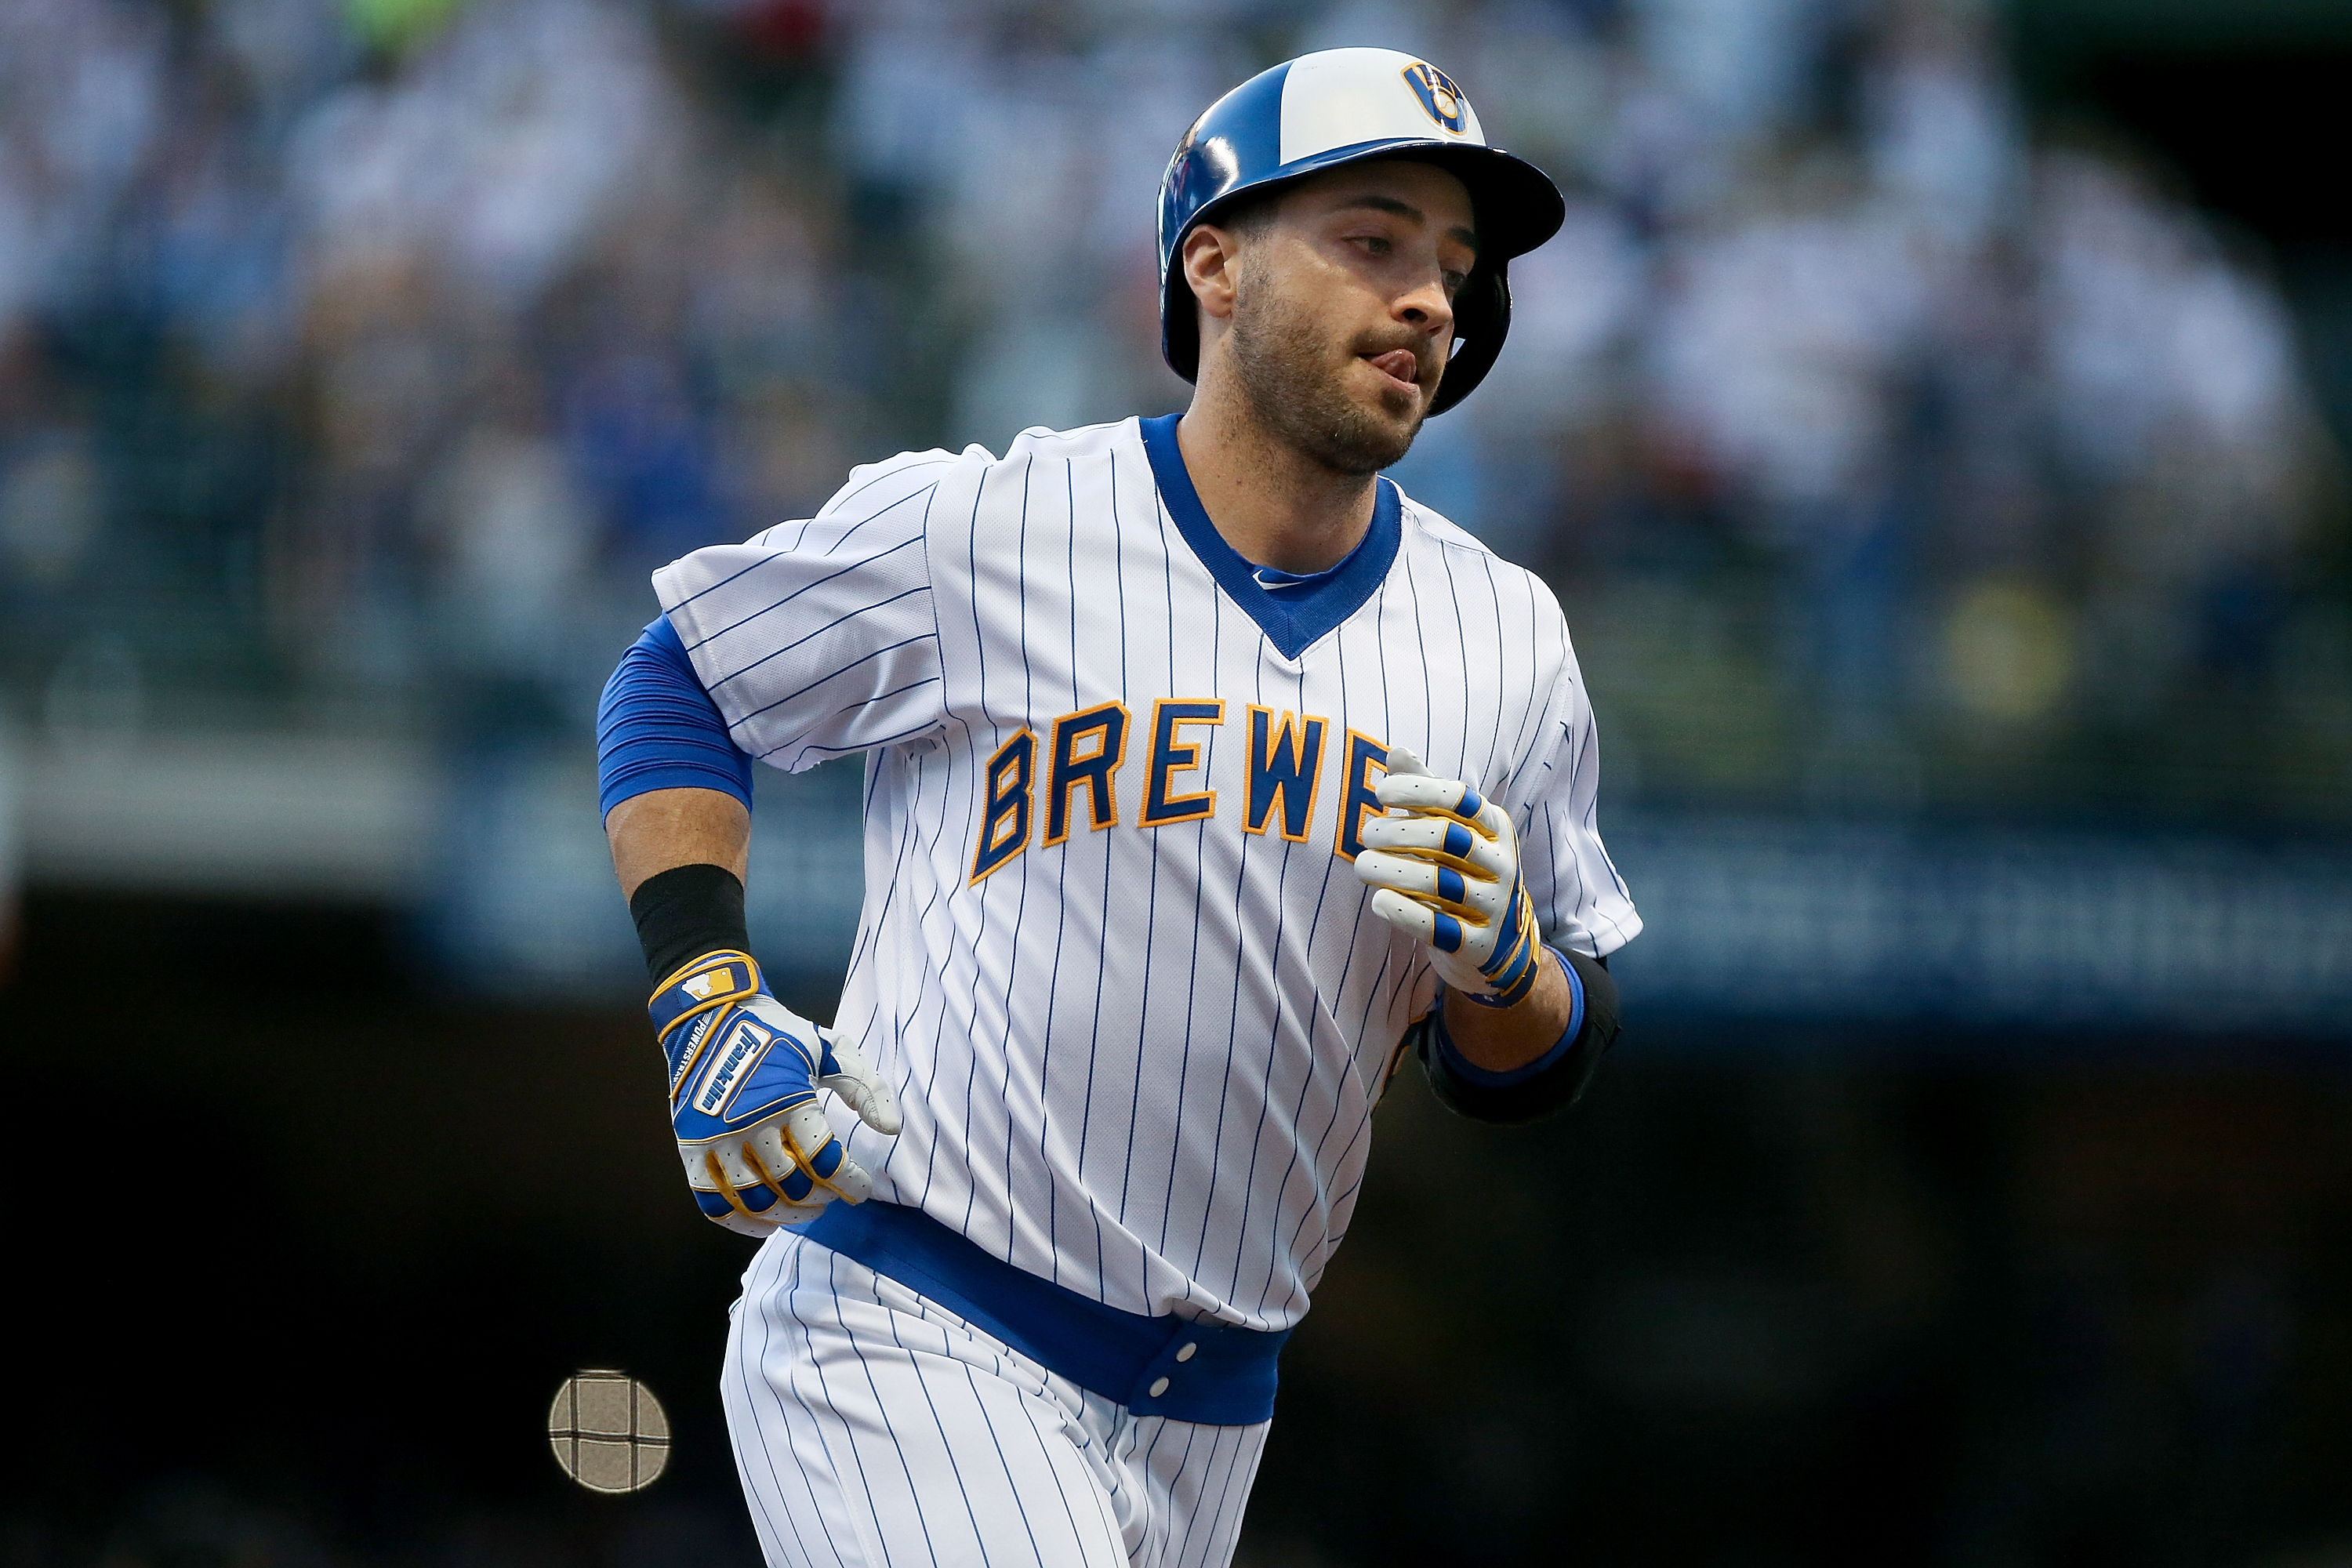 Fielder sets Brewers' RBI record